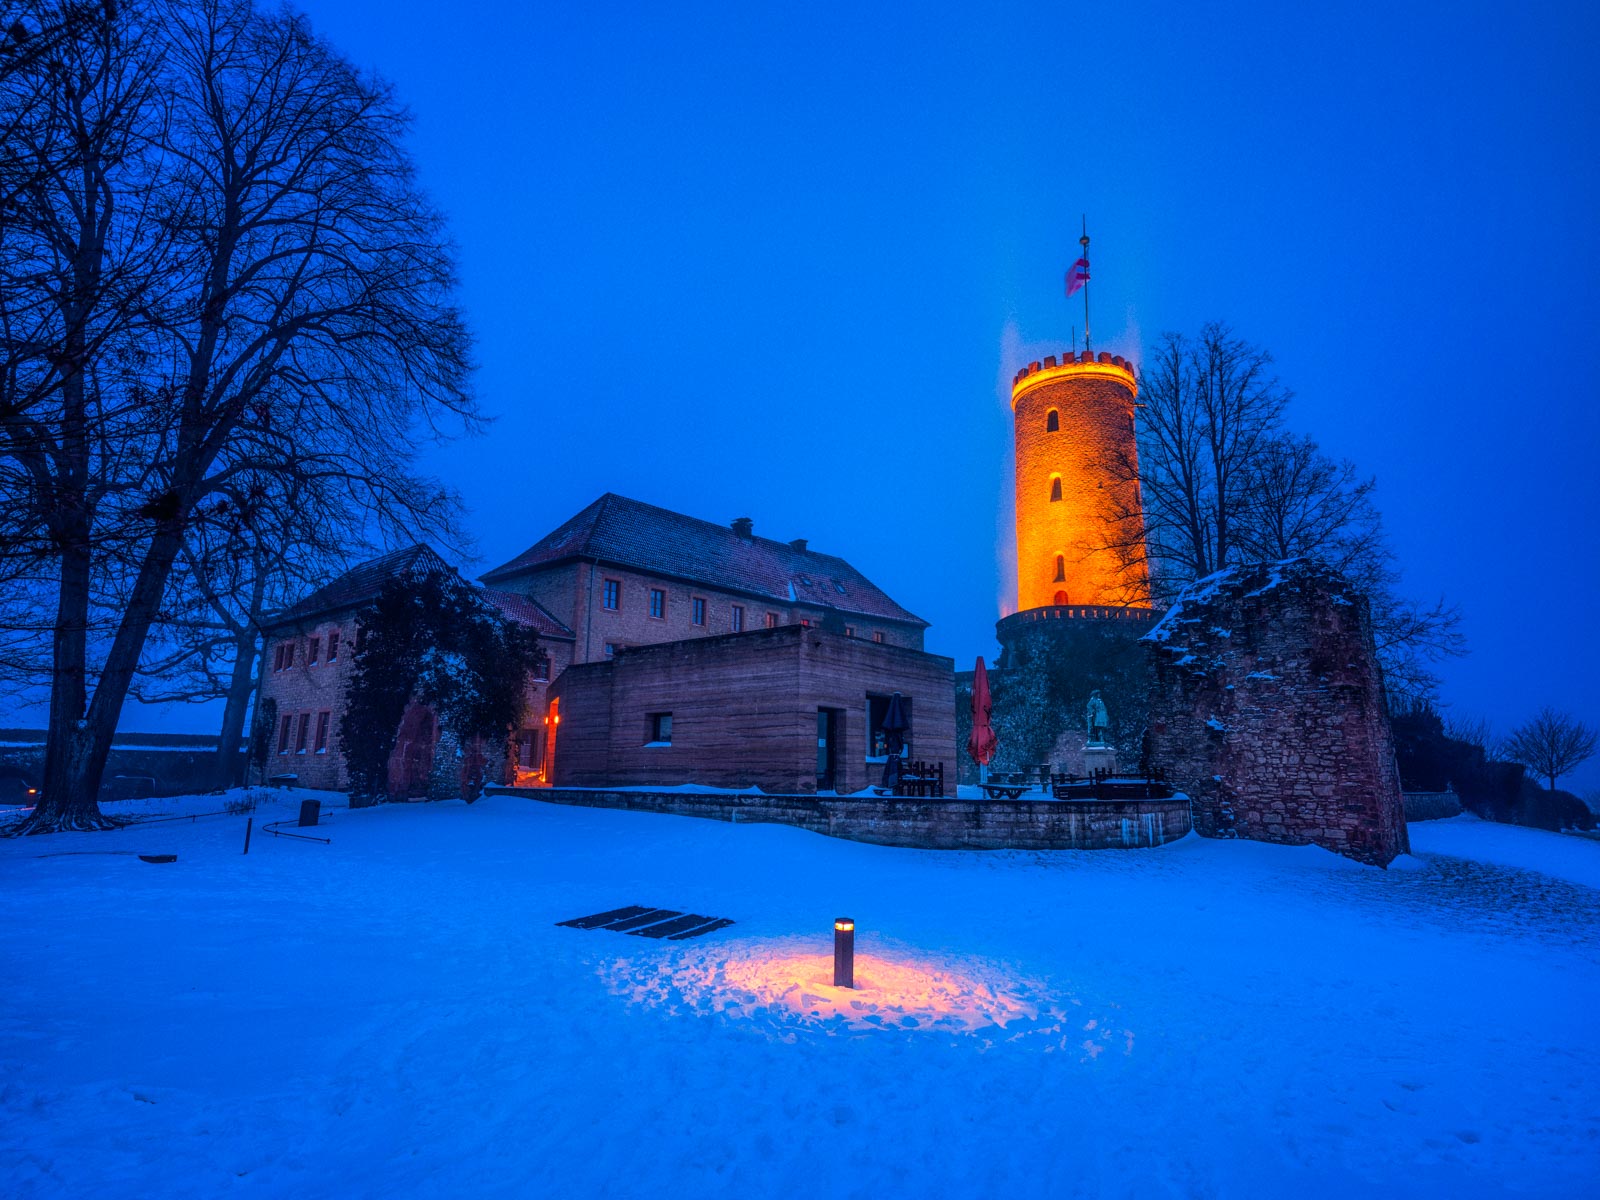 After the snowstorm on 7 February 2021 - 'Sparrenburg' Castle (Bielefeld, Germany).